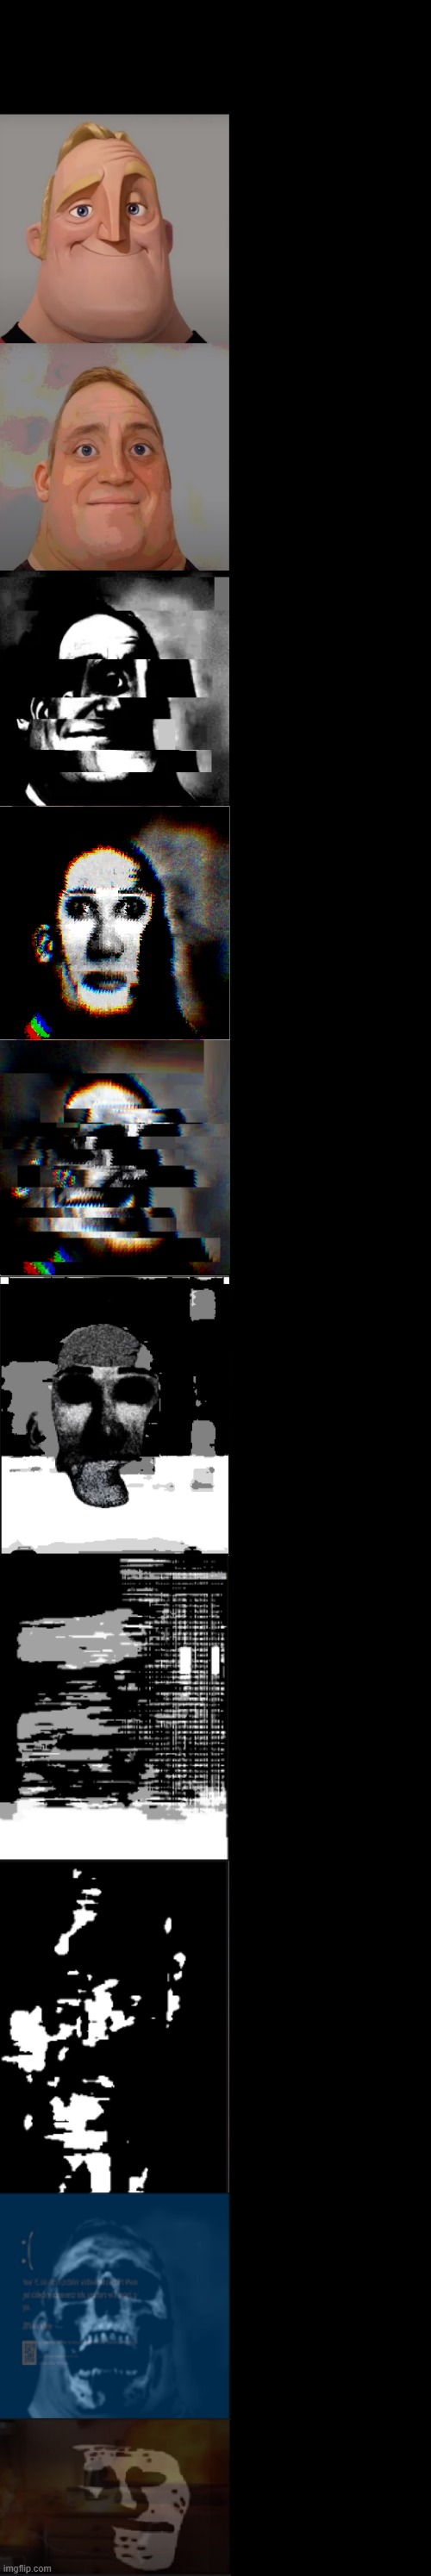 mr incredible becoming glitched and uncanny at the same time | image tagged in mr incredible becoming glitched template | made w/ Imgflip meme maker